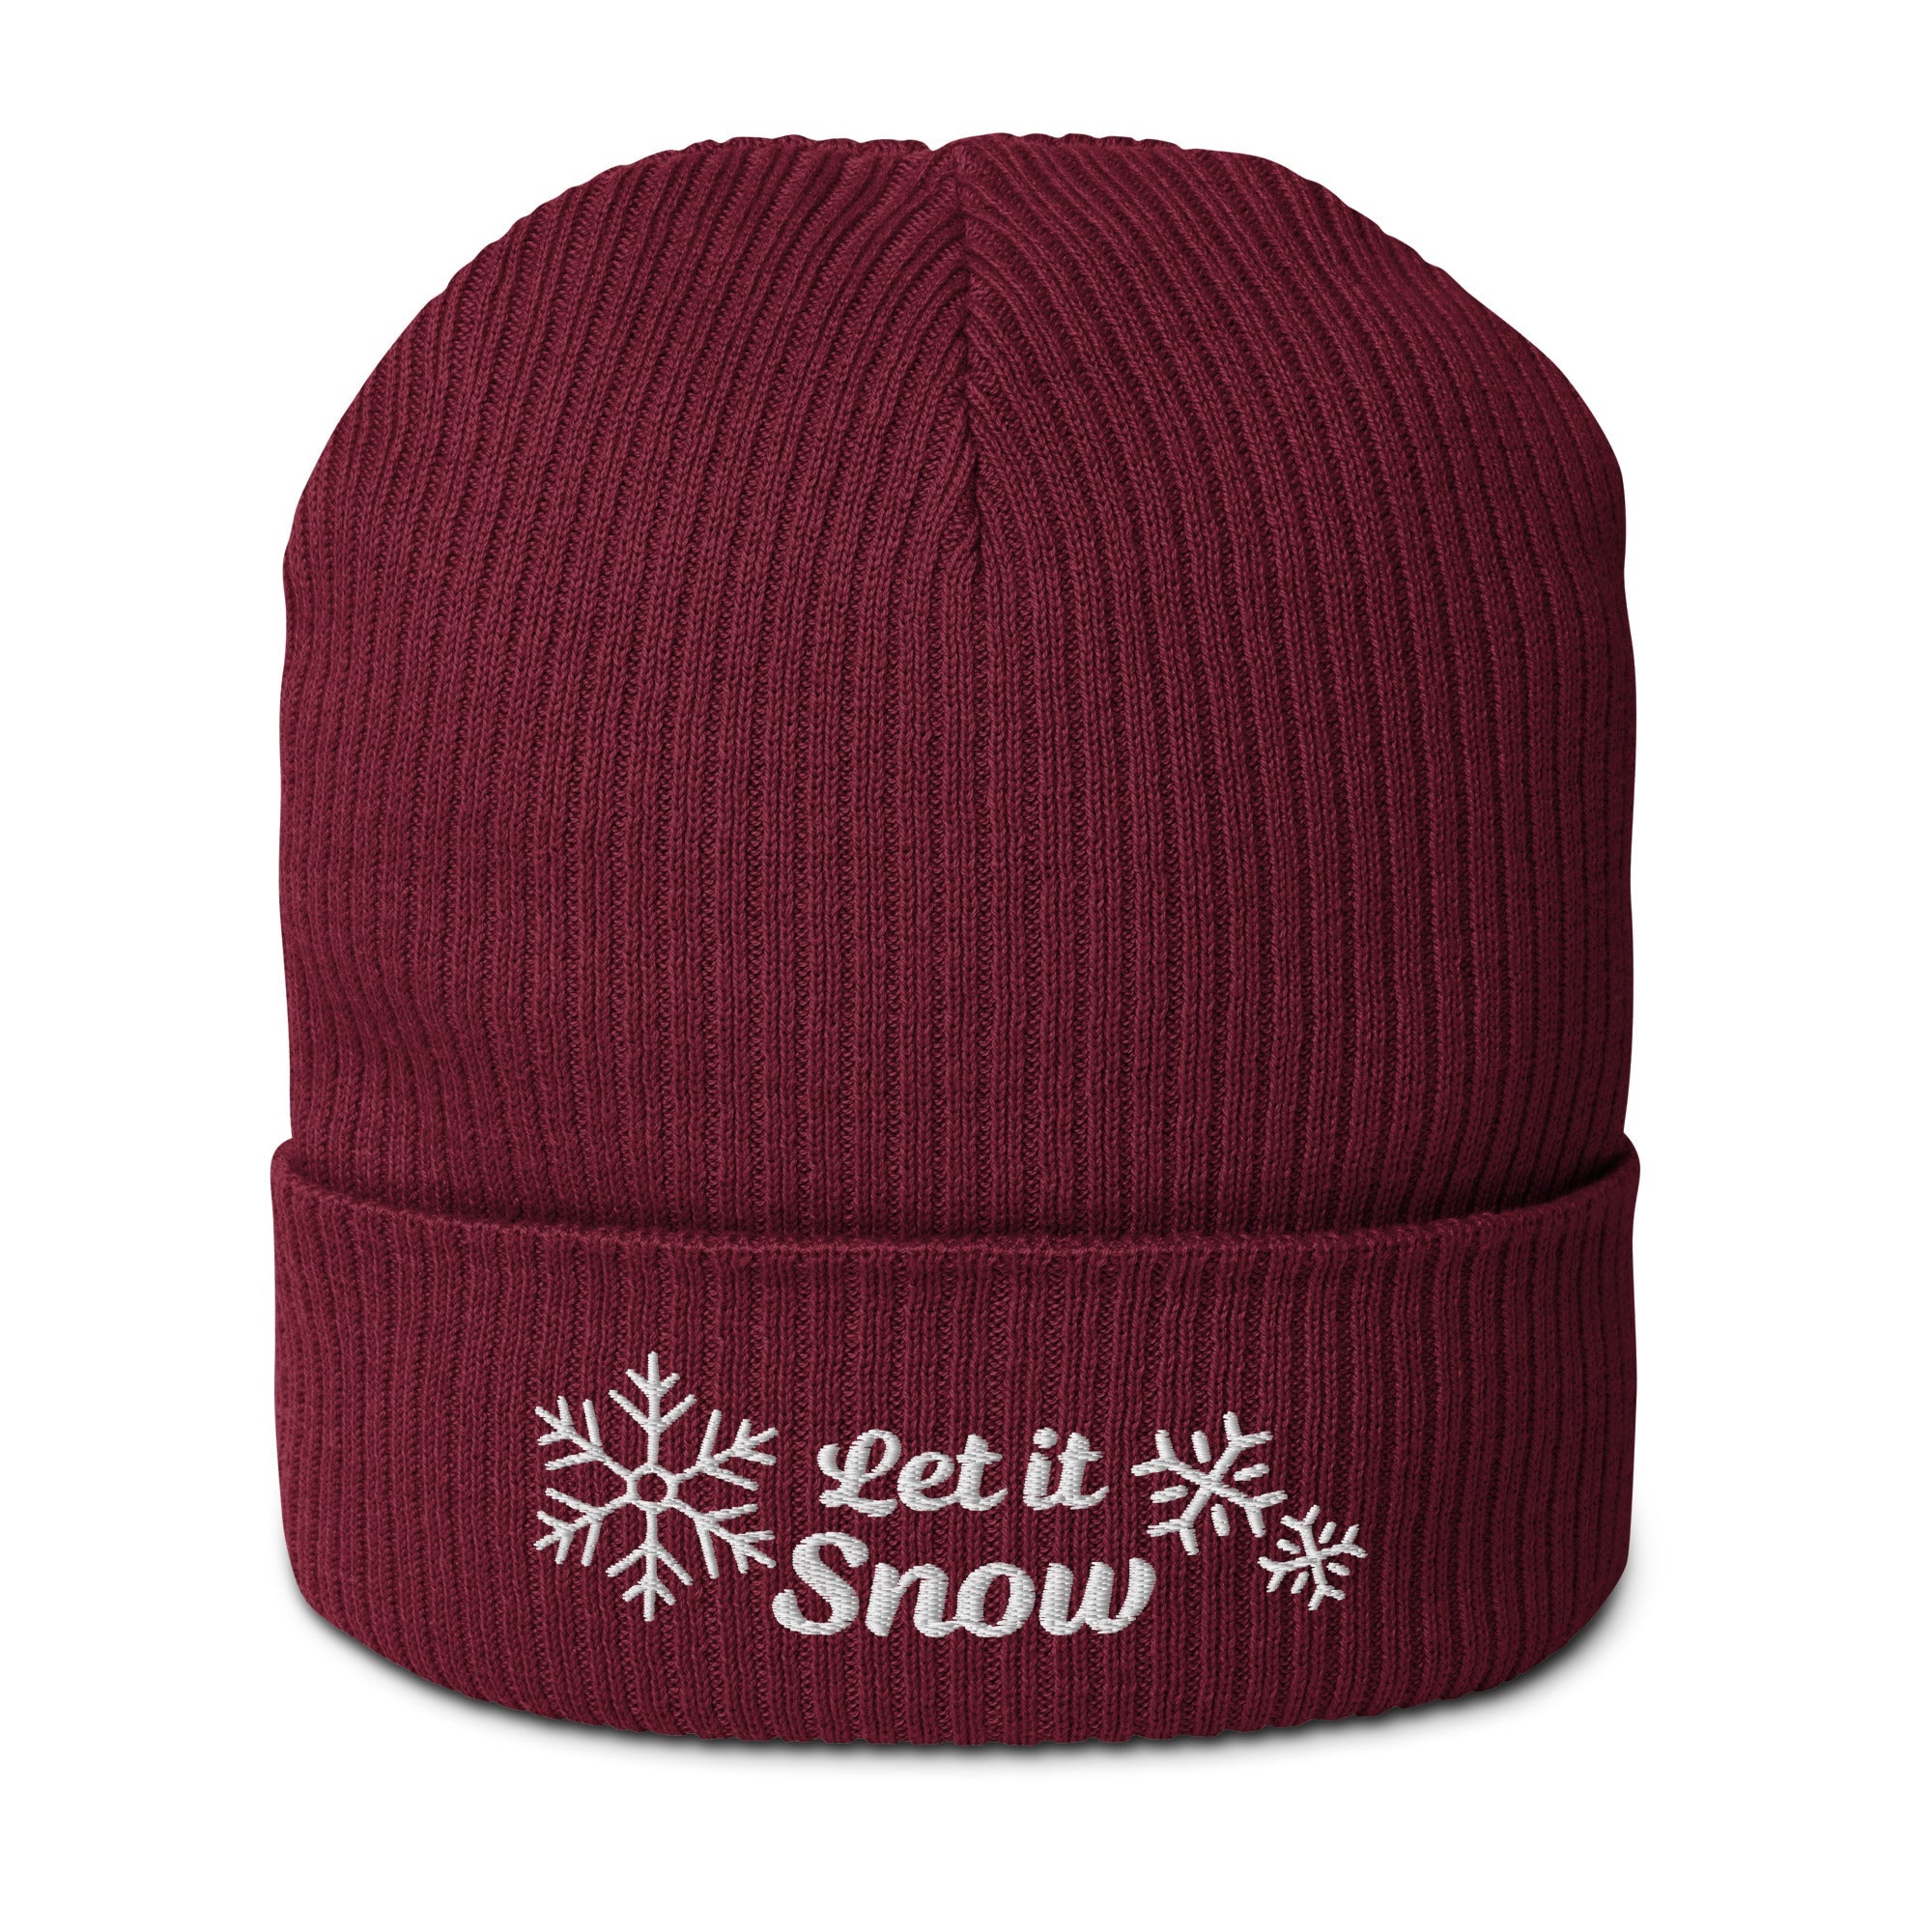 Let it snow embroidered organic ribbed beanie - cute gift idea for Christmas, for winter-0